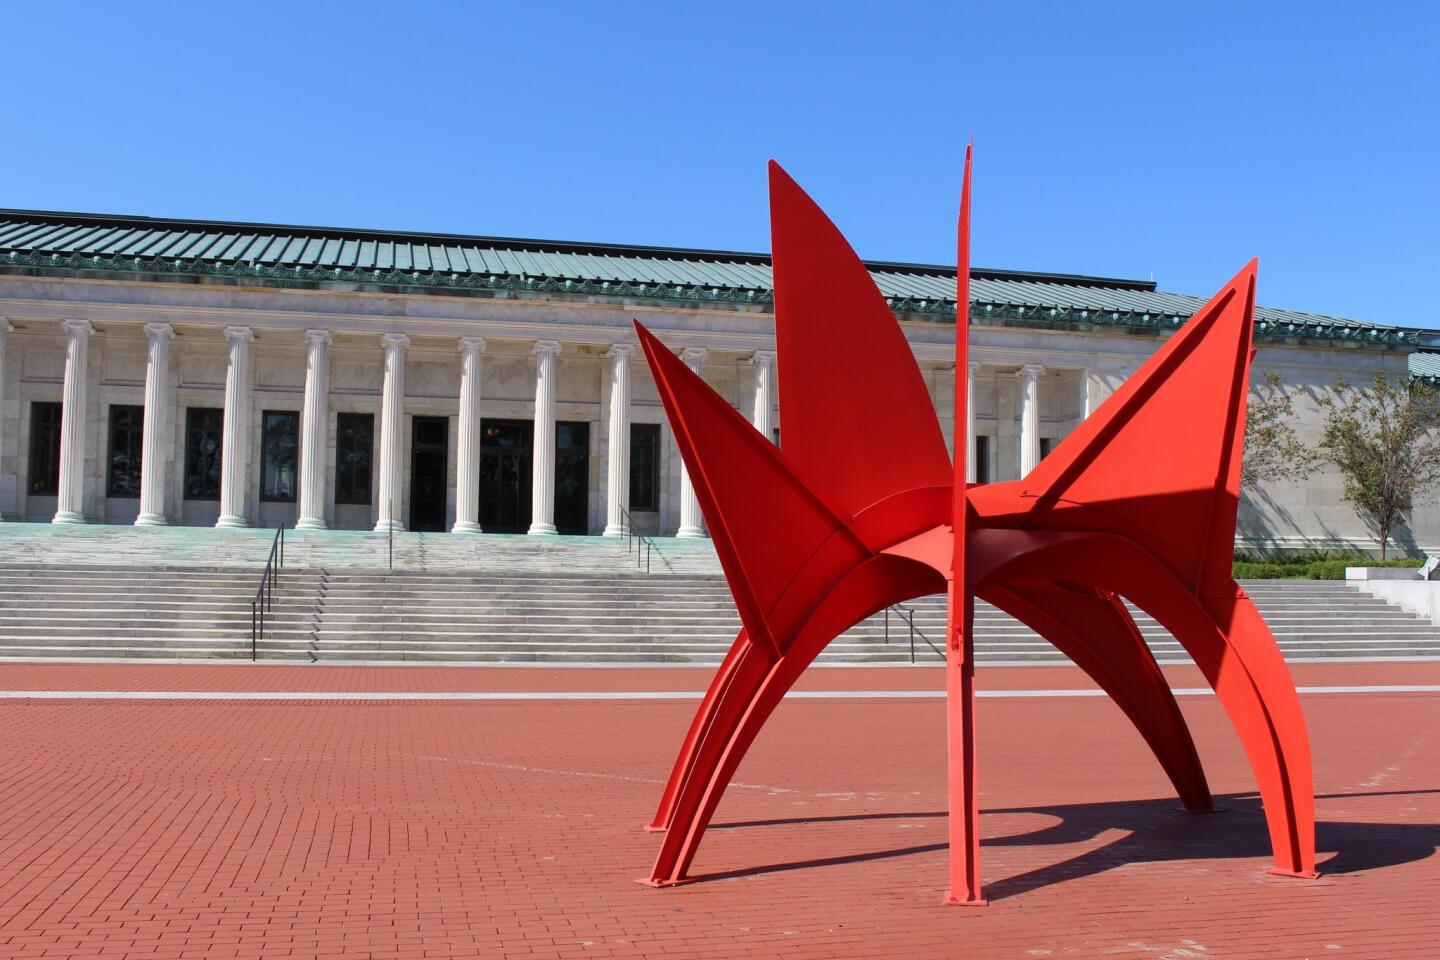 The grand exterior of the Toledo Museum of Art (with Alexander Calder’s Stegosaurus) provides only a hint of the wonders within — by Renoir, Van Gogh, Picasso, Degas, Miro, O’Keeffe, Henry Moore and other masters, ancient and modern.